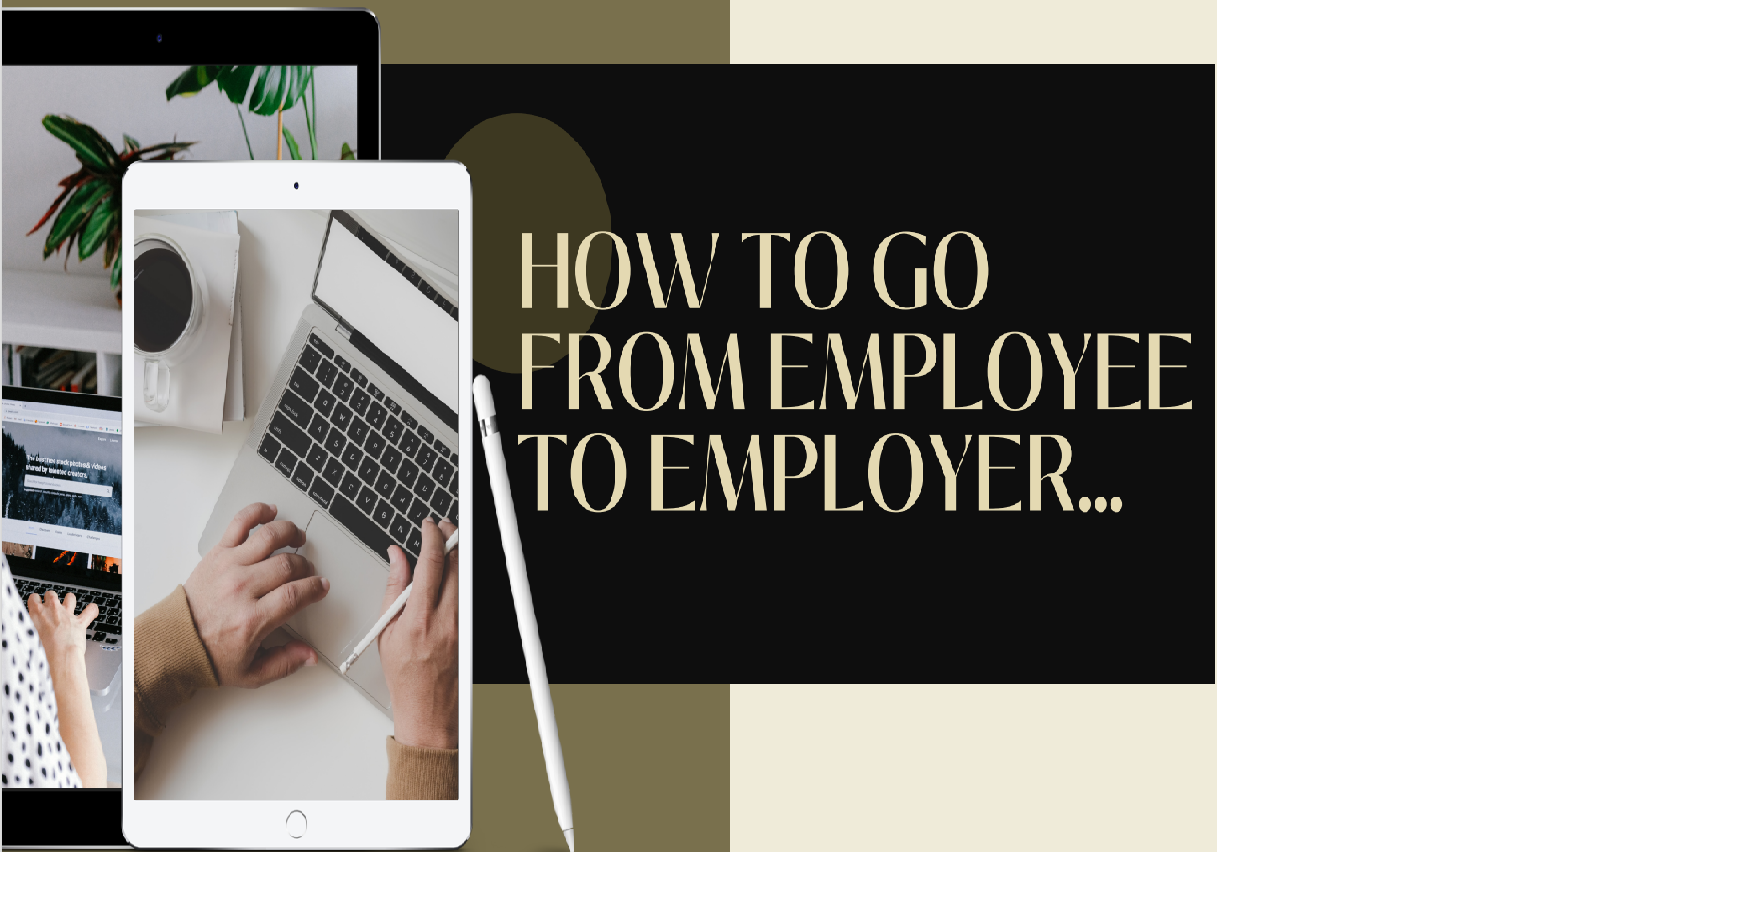 HOW TO GO FROM EMPLOYEE TO EMPLOYER
